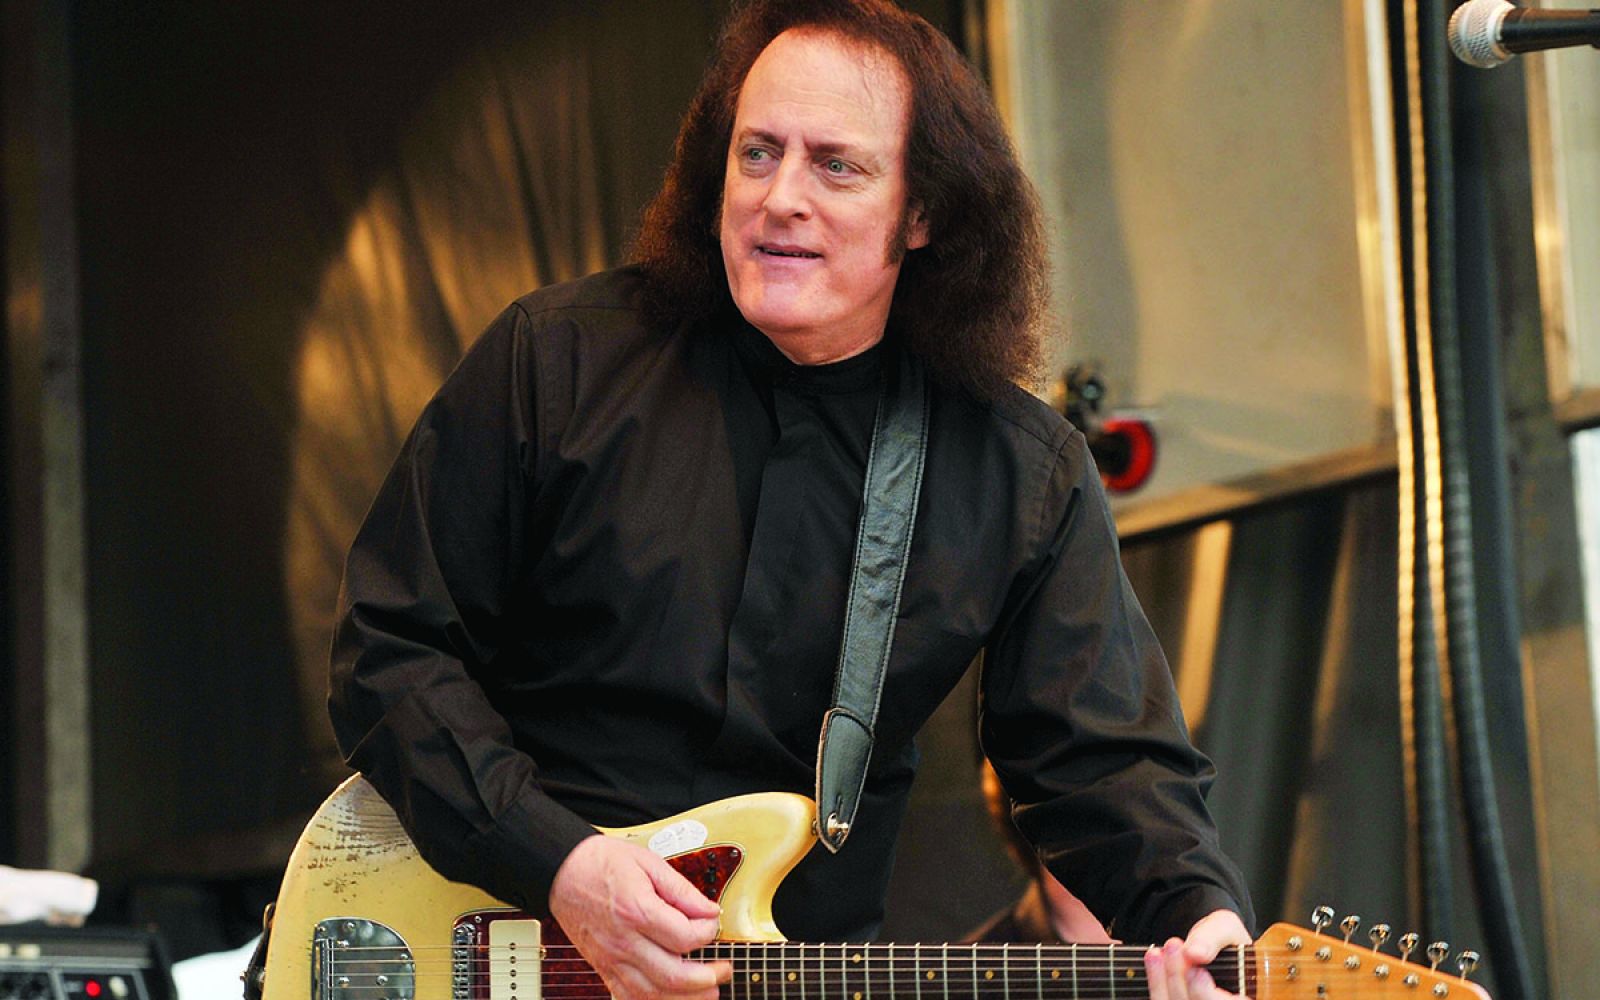 Tommy James & The Shondells will be at Honeywell Center in Wabash on Saturday, March 30.